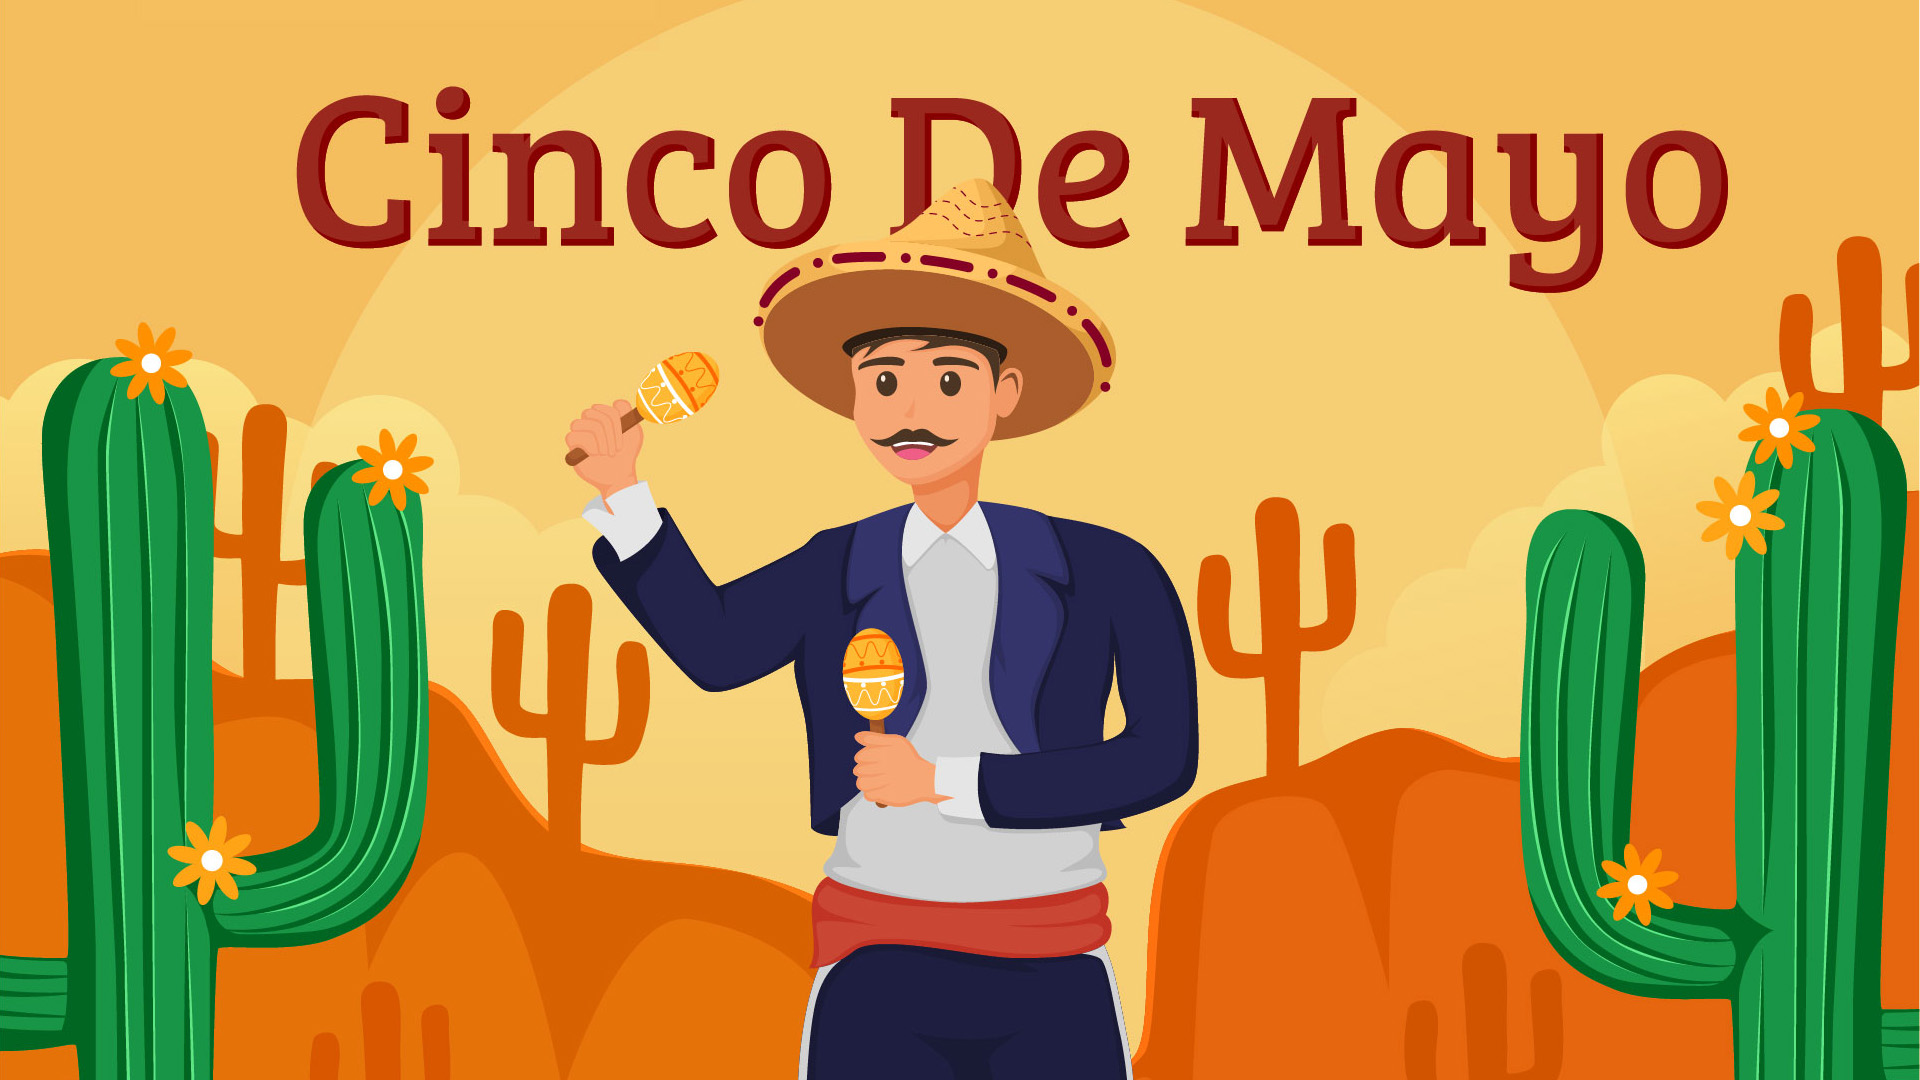 The background has different tints of orange making out to be a sun setting. There are 2 cactuses on the left and right side of the graphic and some in the distance making up a valley. There's a man wearing a deep purple tuxedo and a sombrero. They have maracas in both hands and appears to be dancing